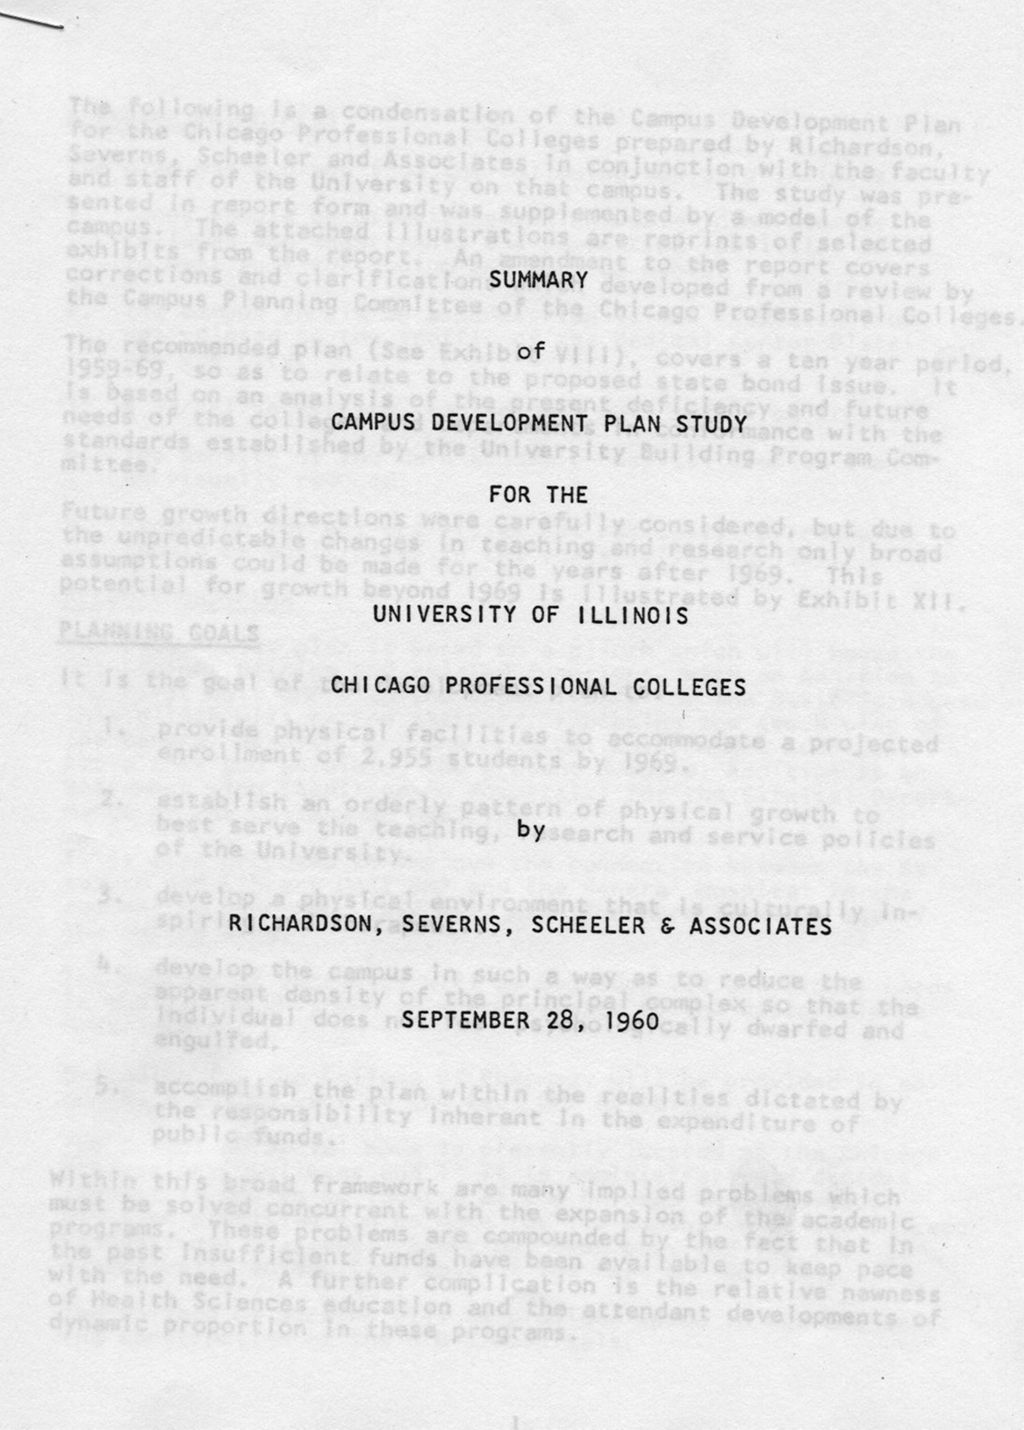 Summary of Campus Development Plan Study for the Chicago Professional Colleges, University of Illinois